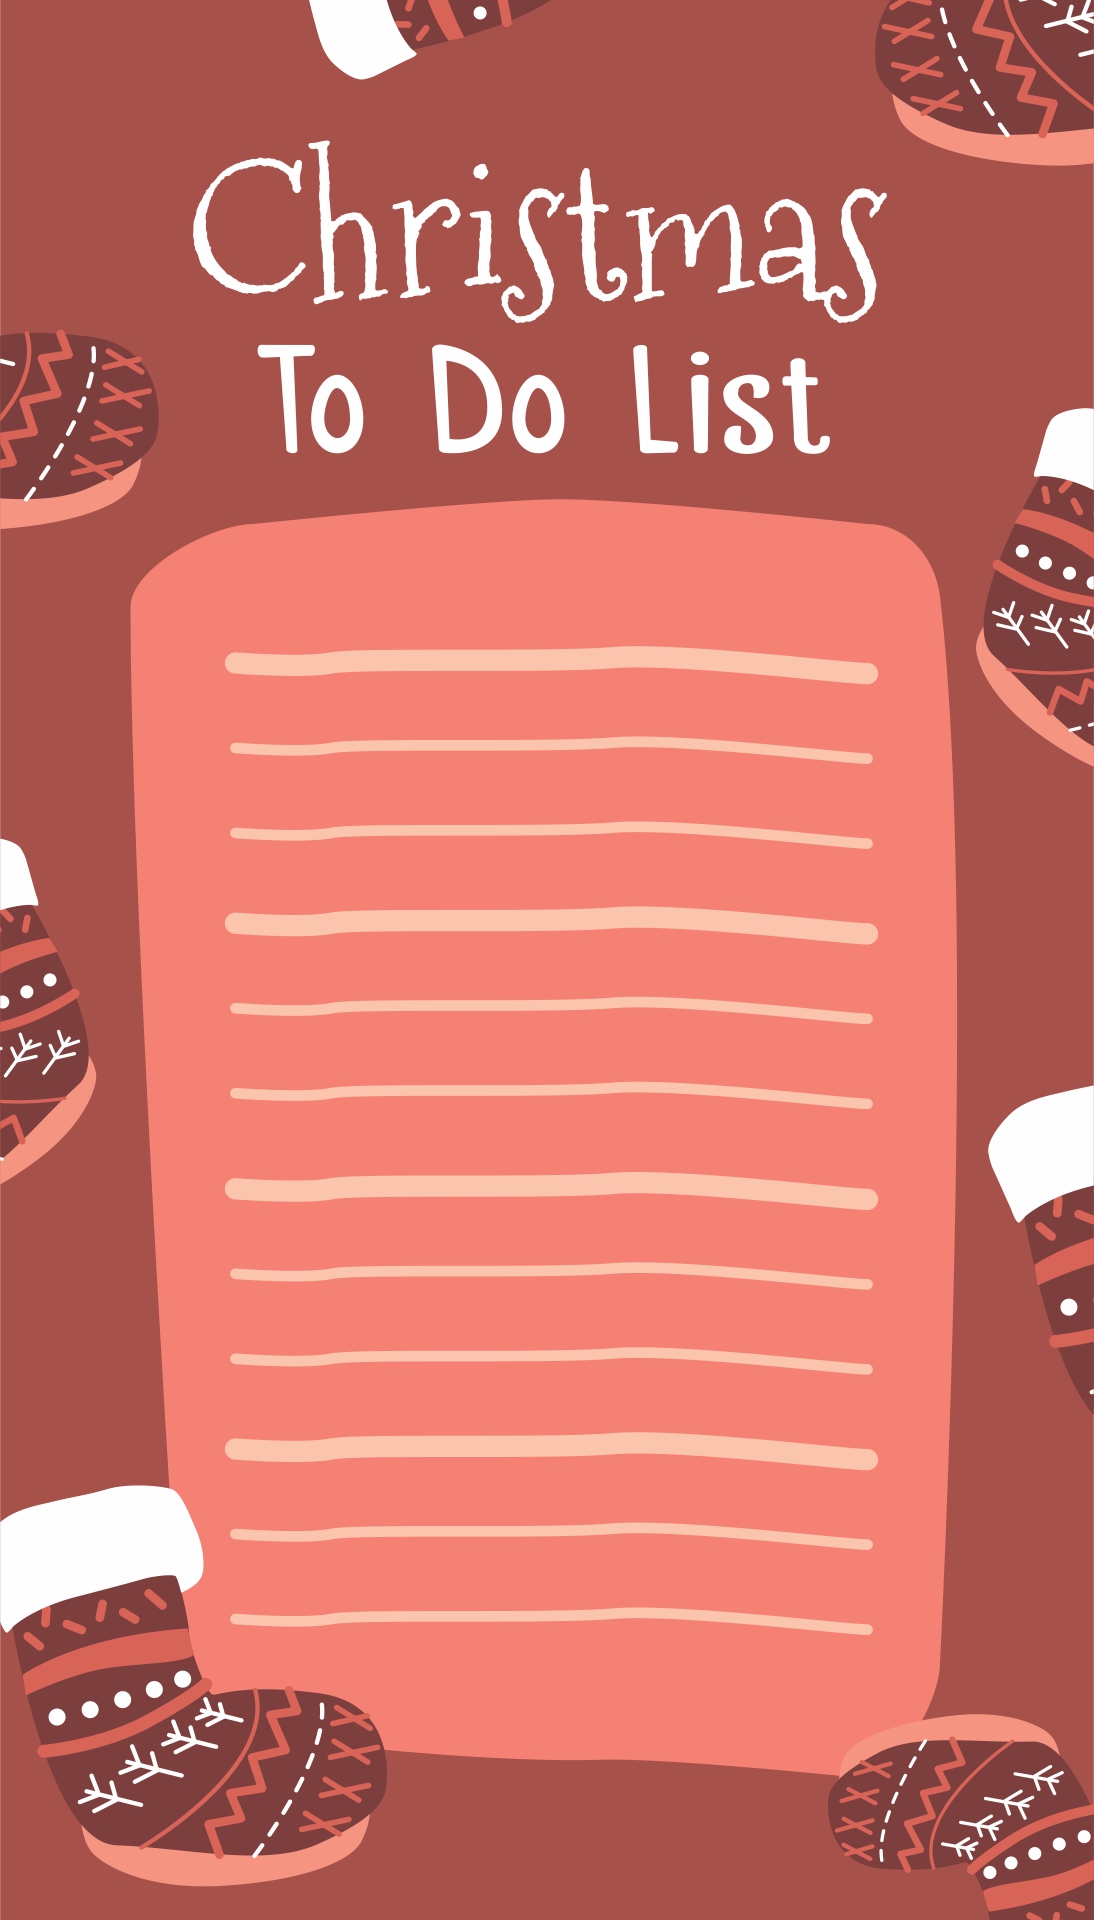 4-best-images-of-free-christmas-printable-to-do-list-template